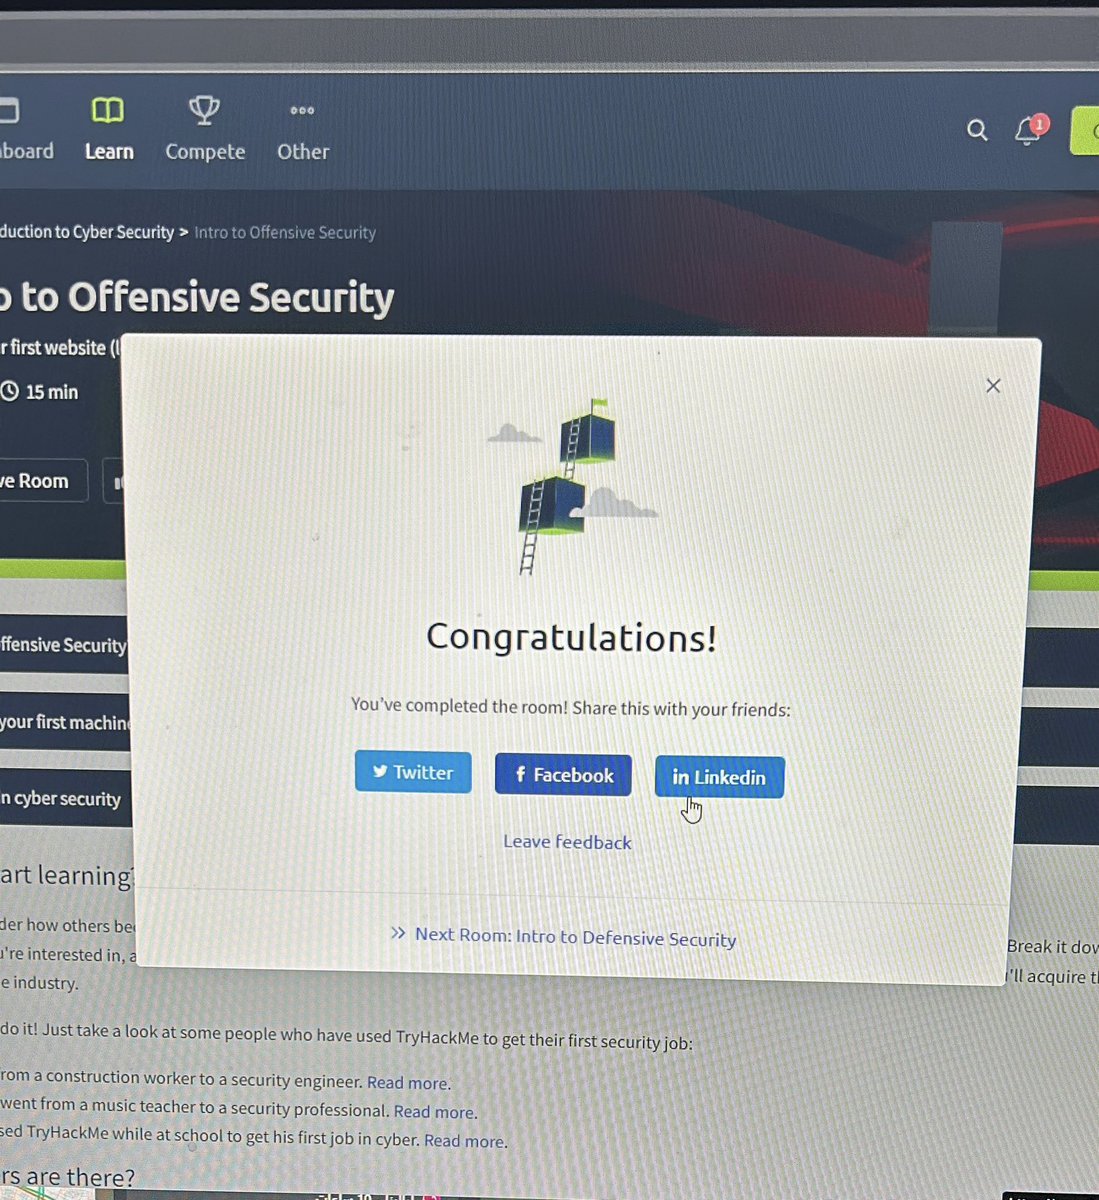 Accomplishment of the Day ✔️

Finished the Intro to Offensive Security room on @RealTryHackMe 

This room covered:

• What is Offensive Security?
• Hacking your first machine
•Careers in cyber security
الحمدلله ✨
#tryhackme #realtryhackme